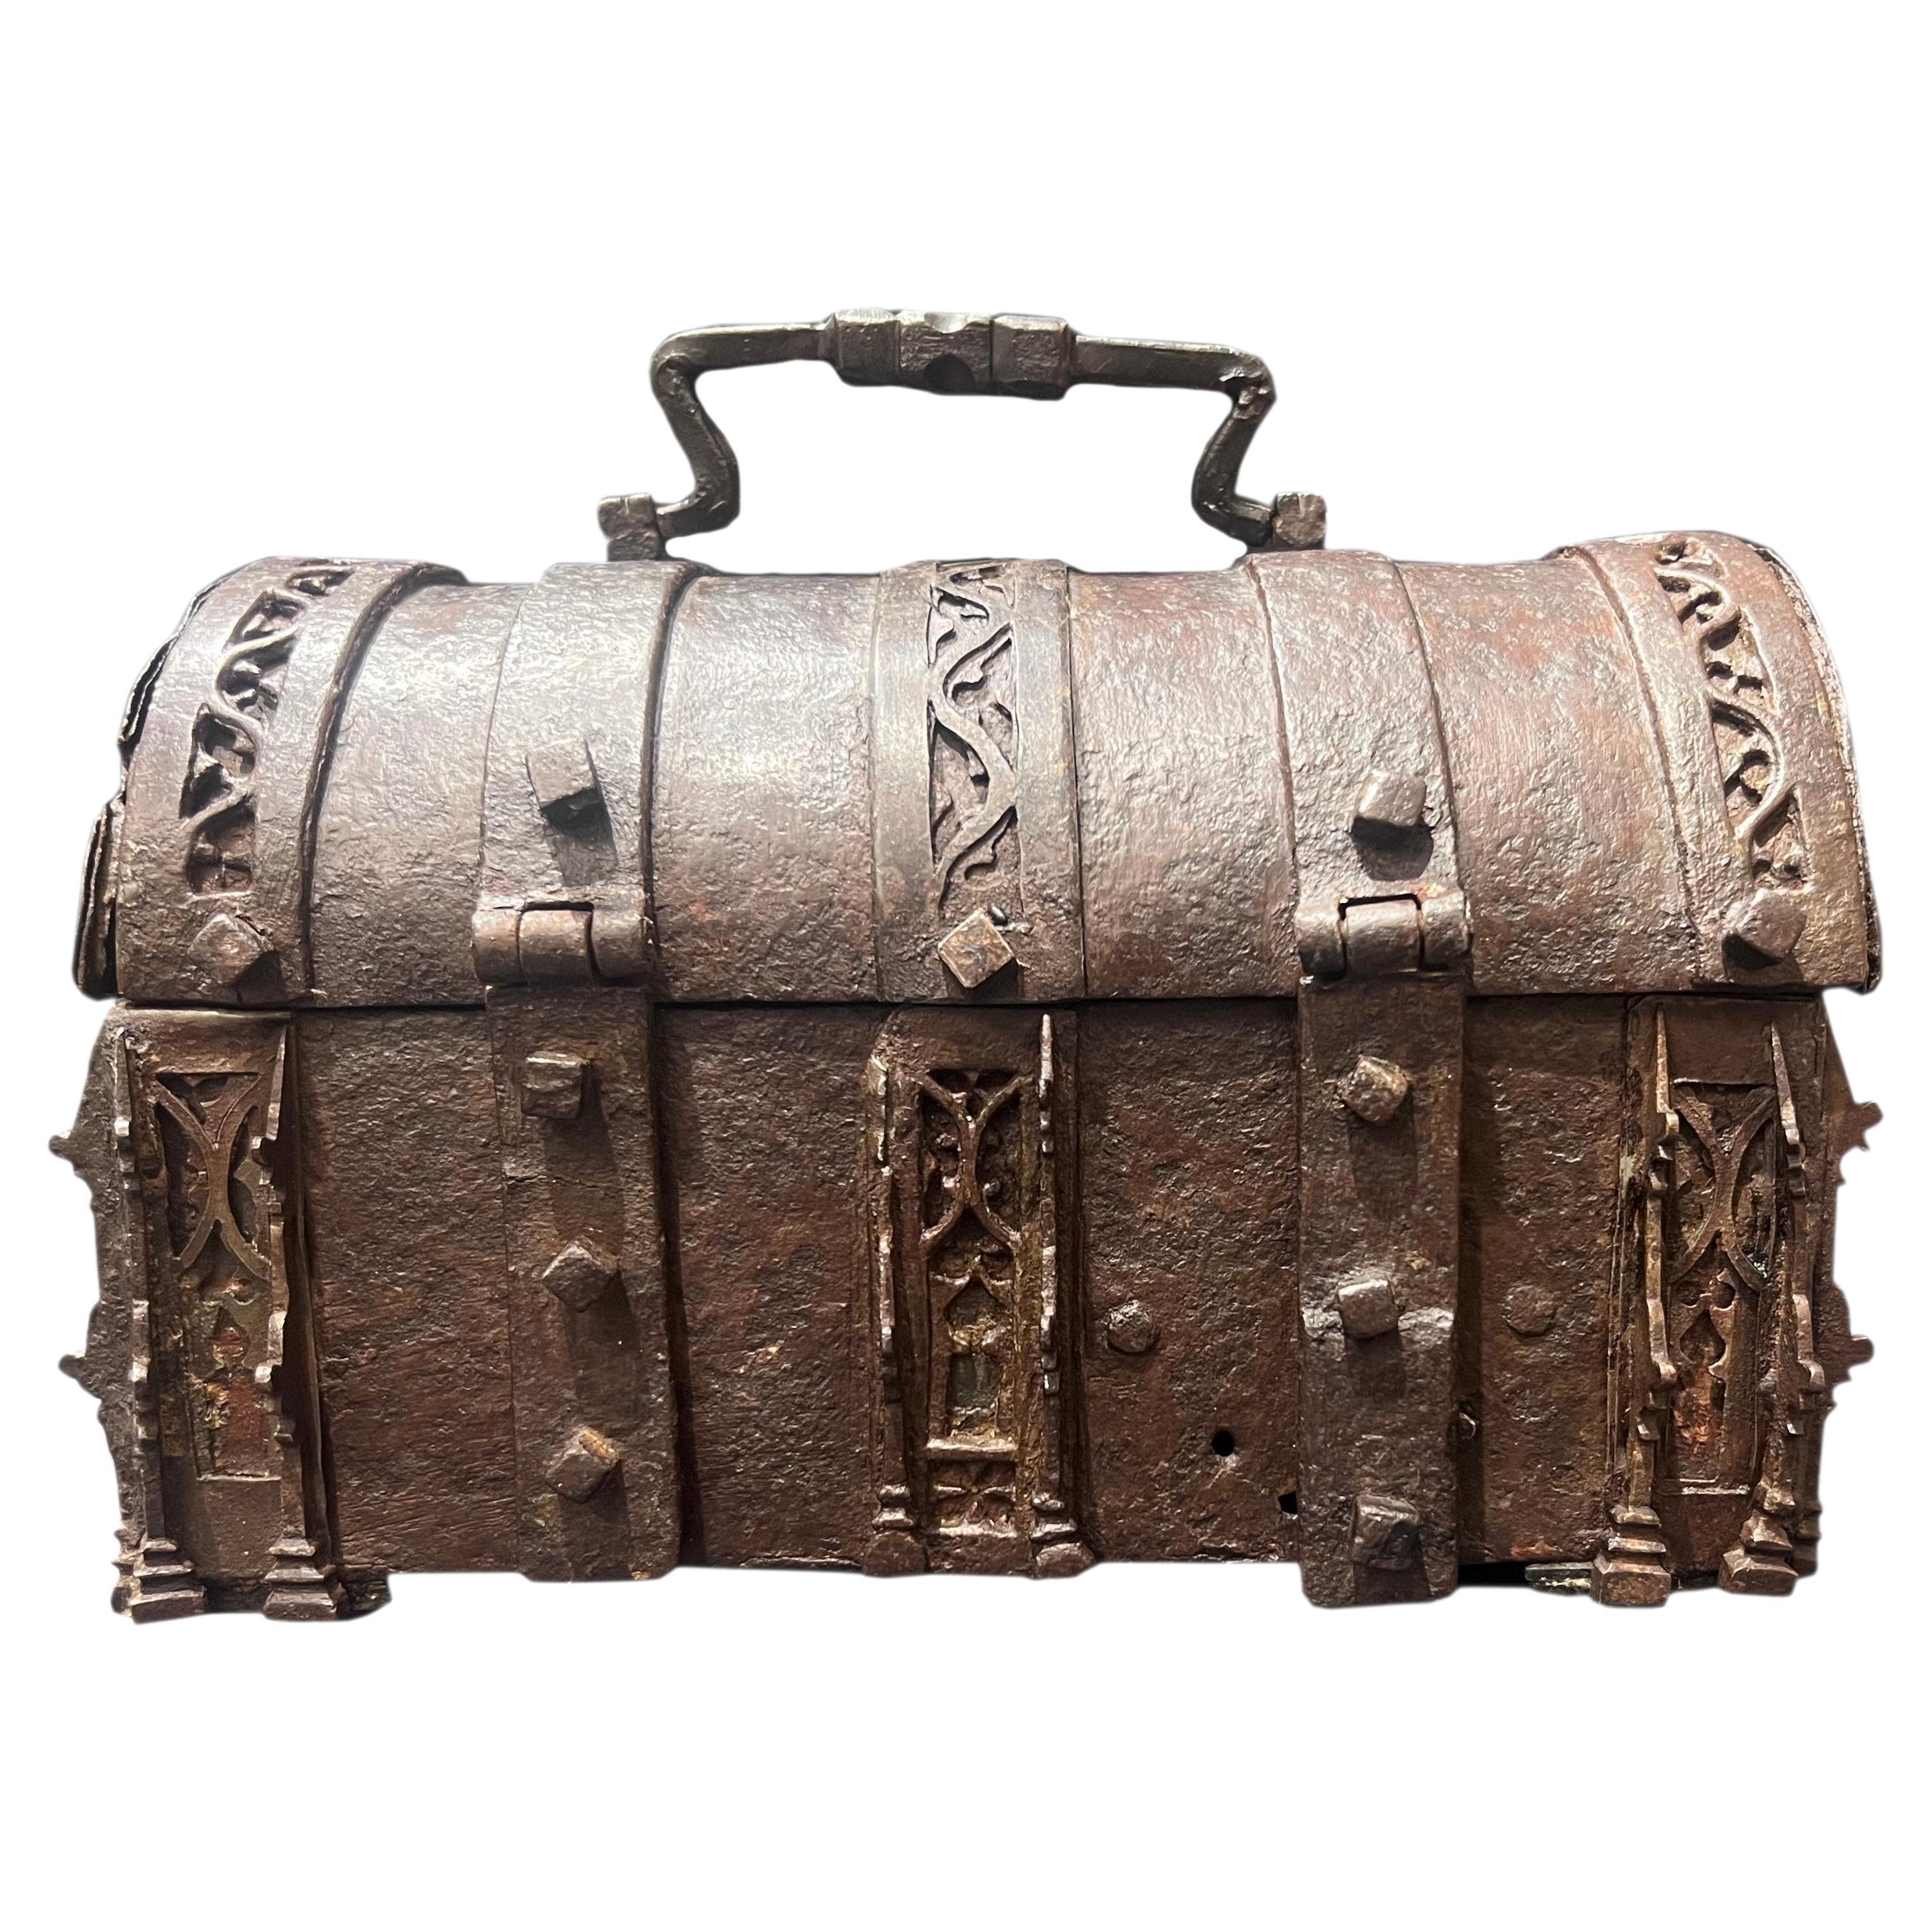 A French 15th century gothic iron casket